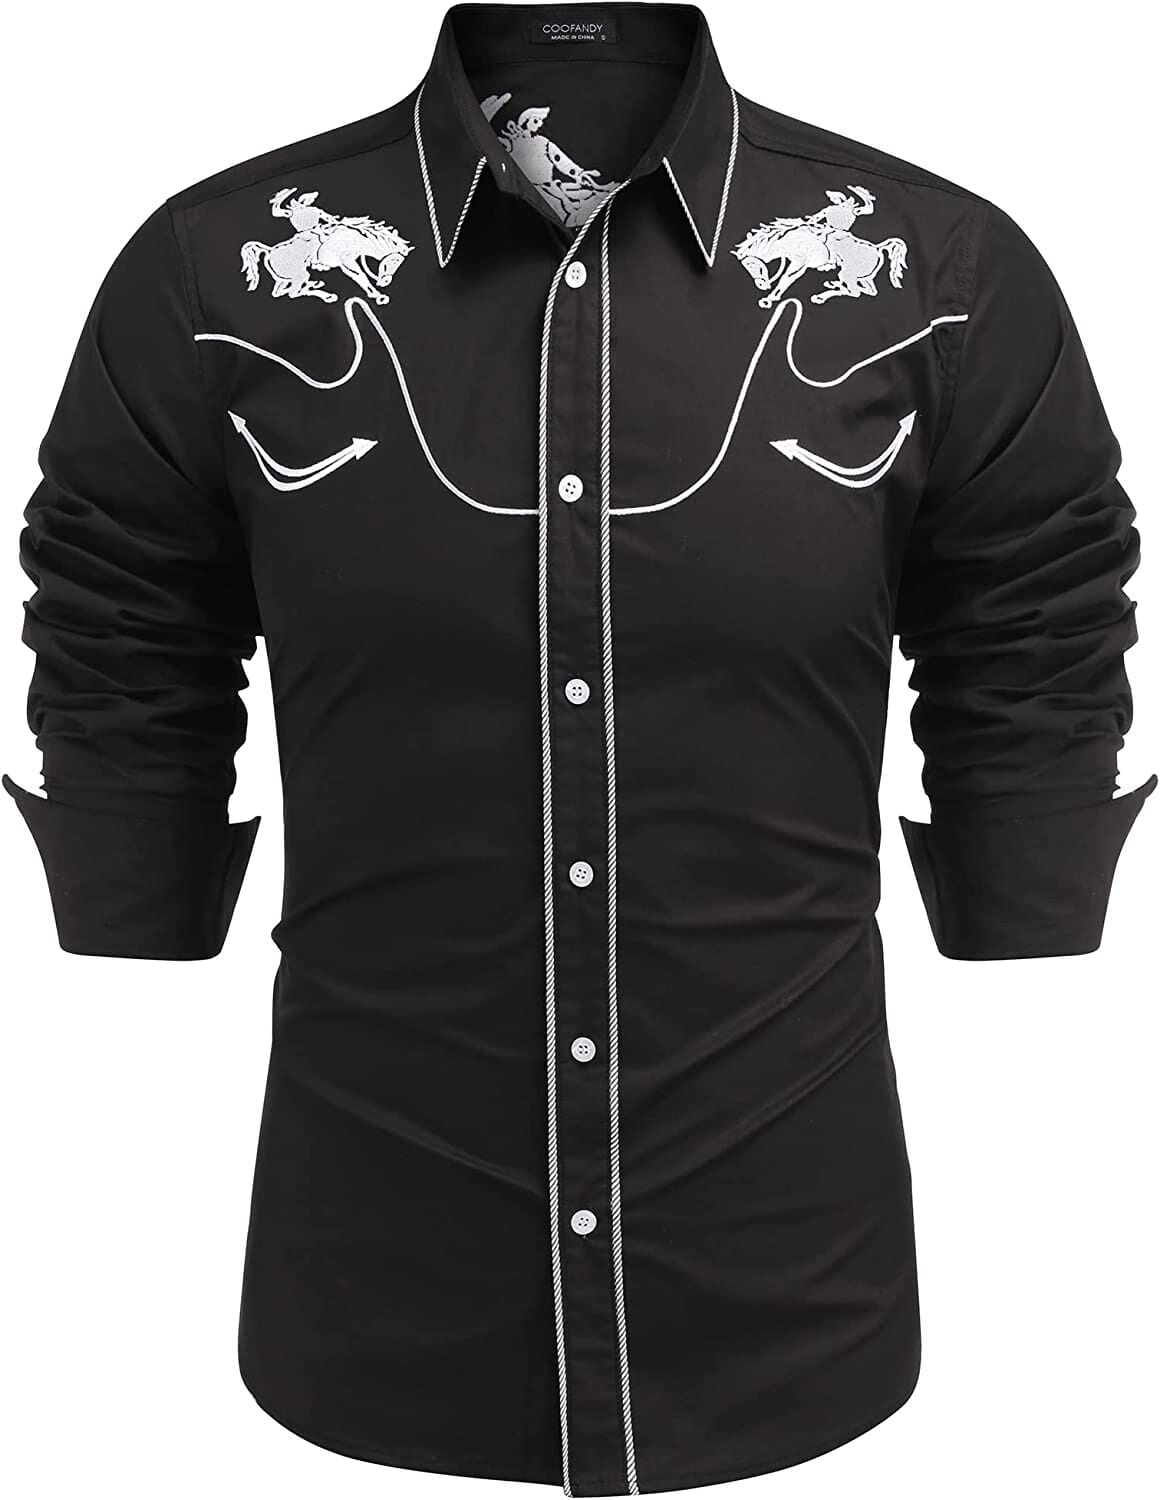 Embroidered Cowboy Button Down Shirt (US Only) Shirts COOFANDY Store Horse Black S 